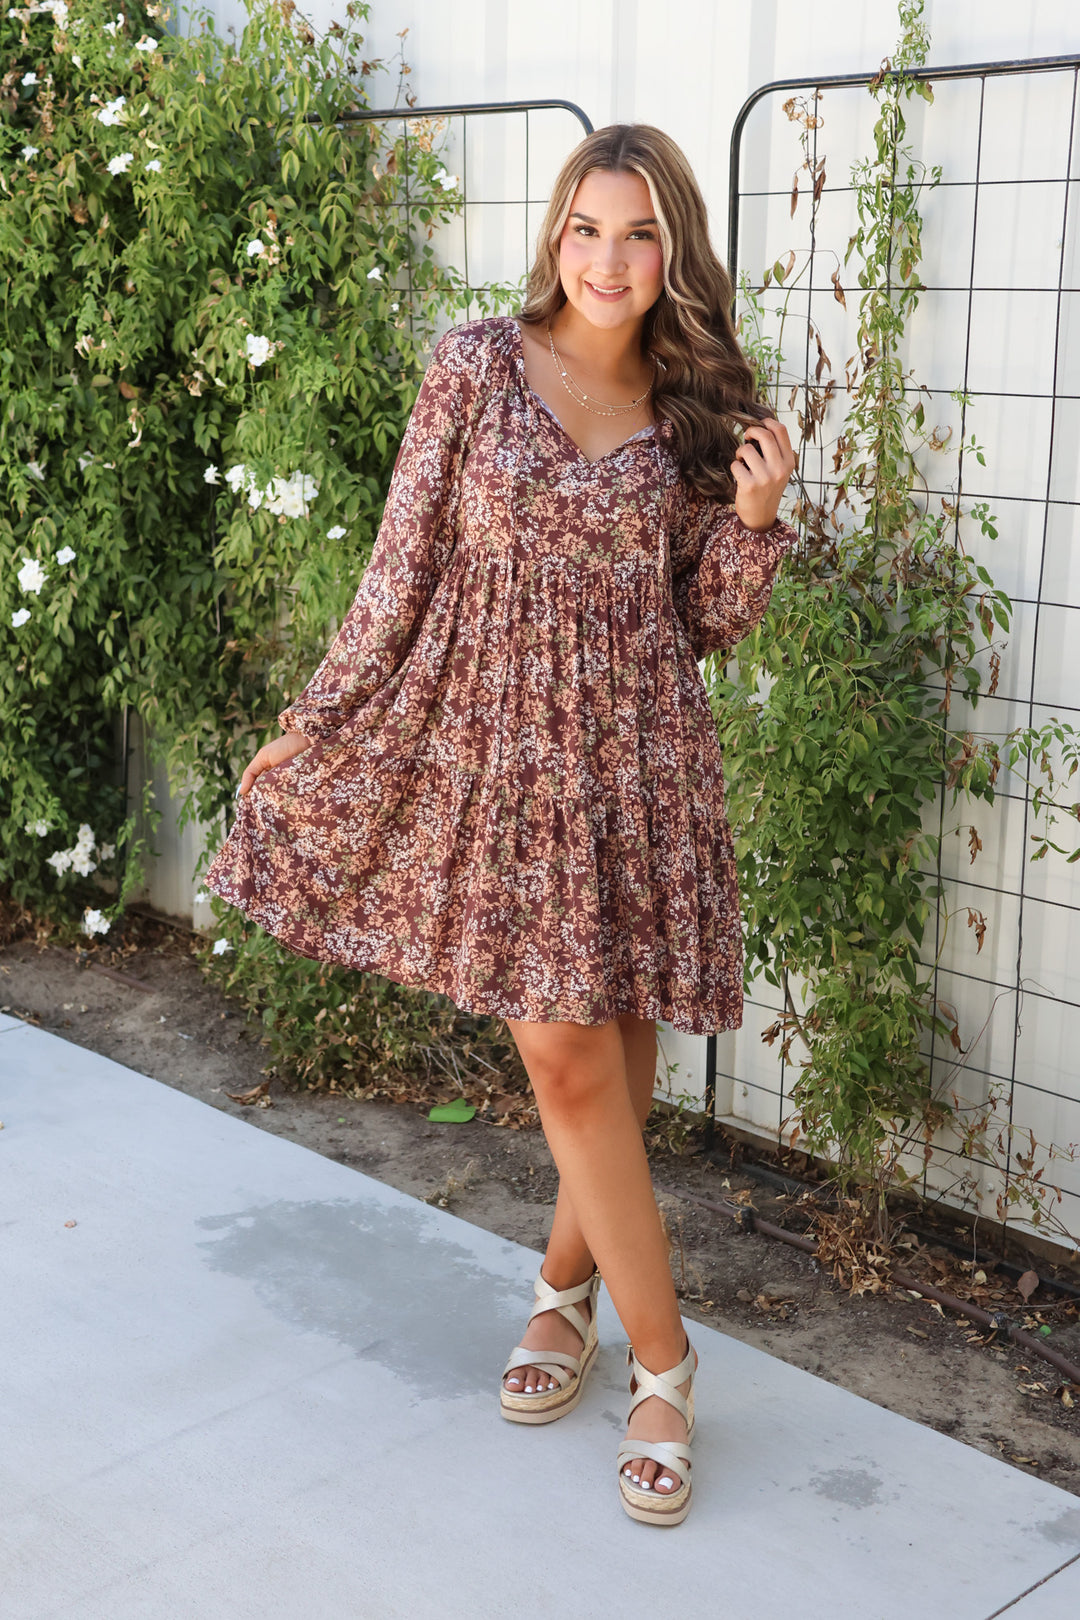 Falling For You Dress - ShopSpoiled